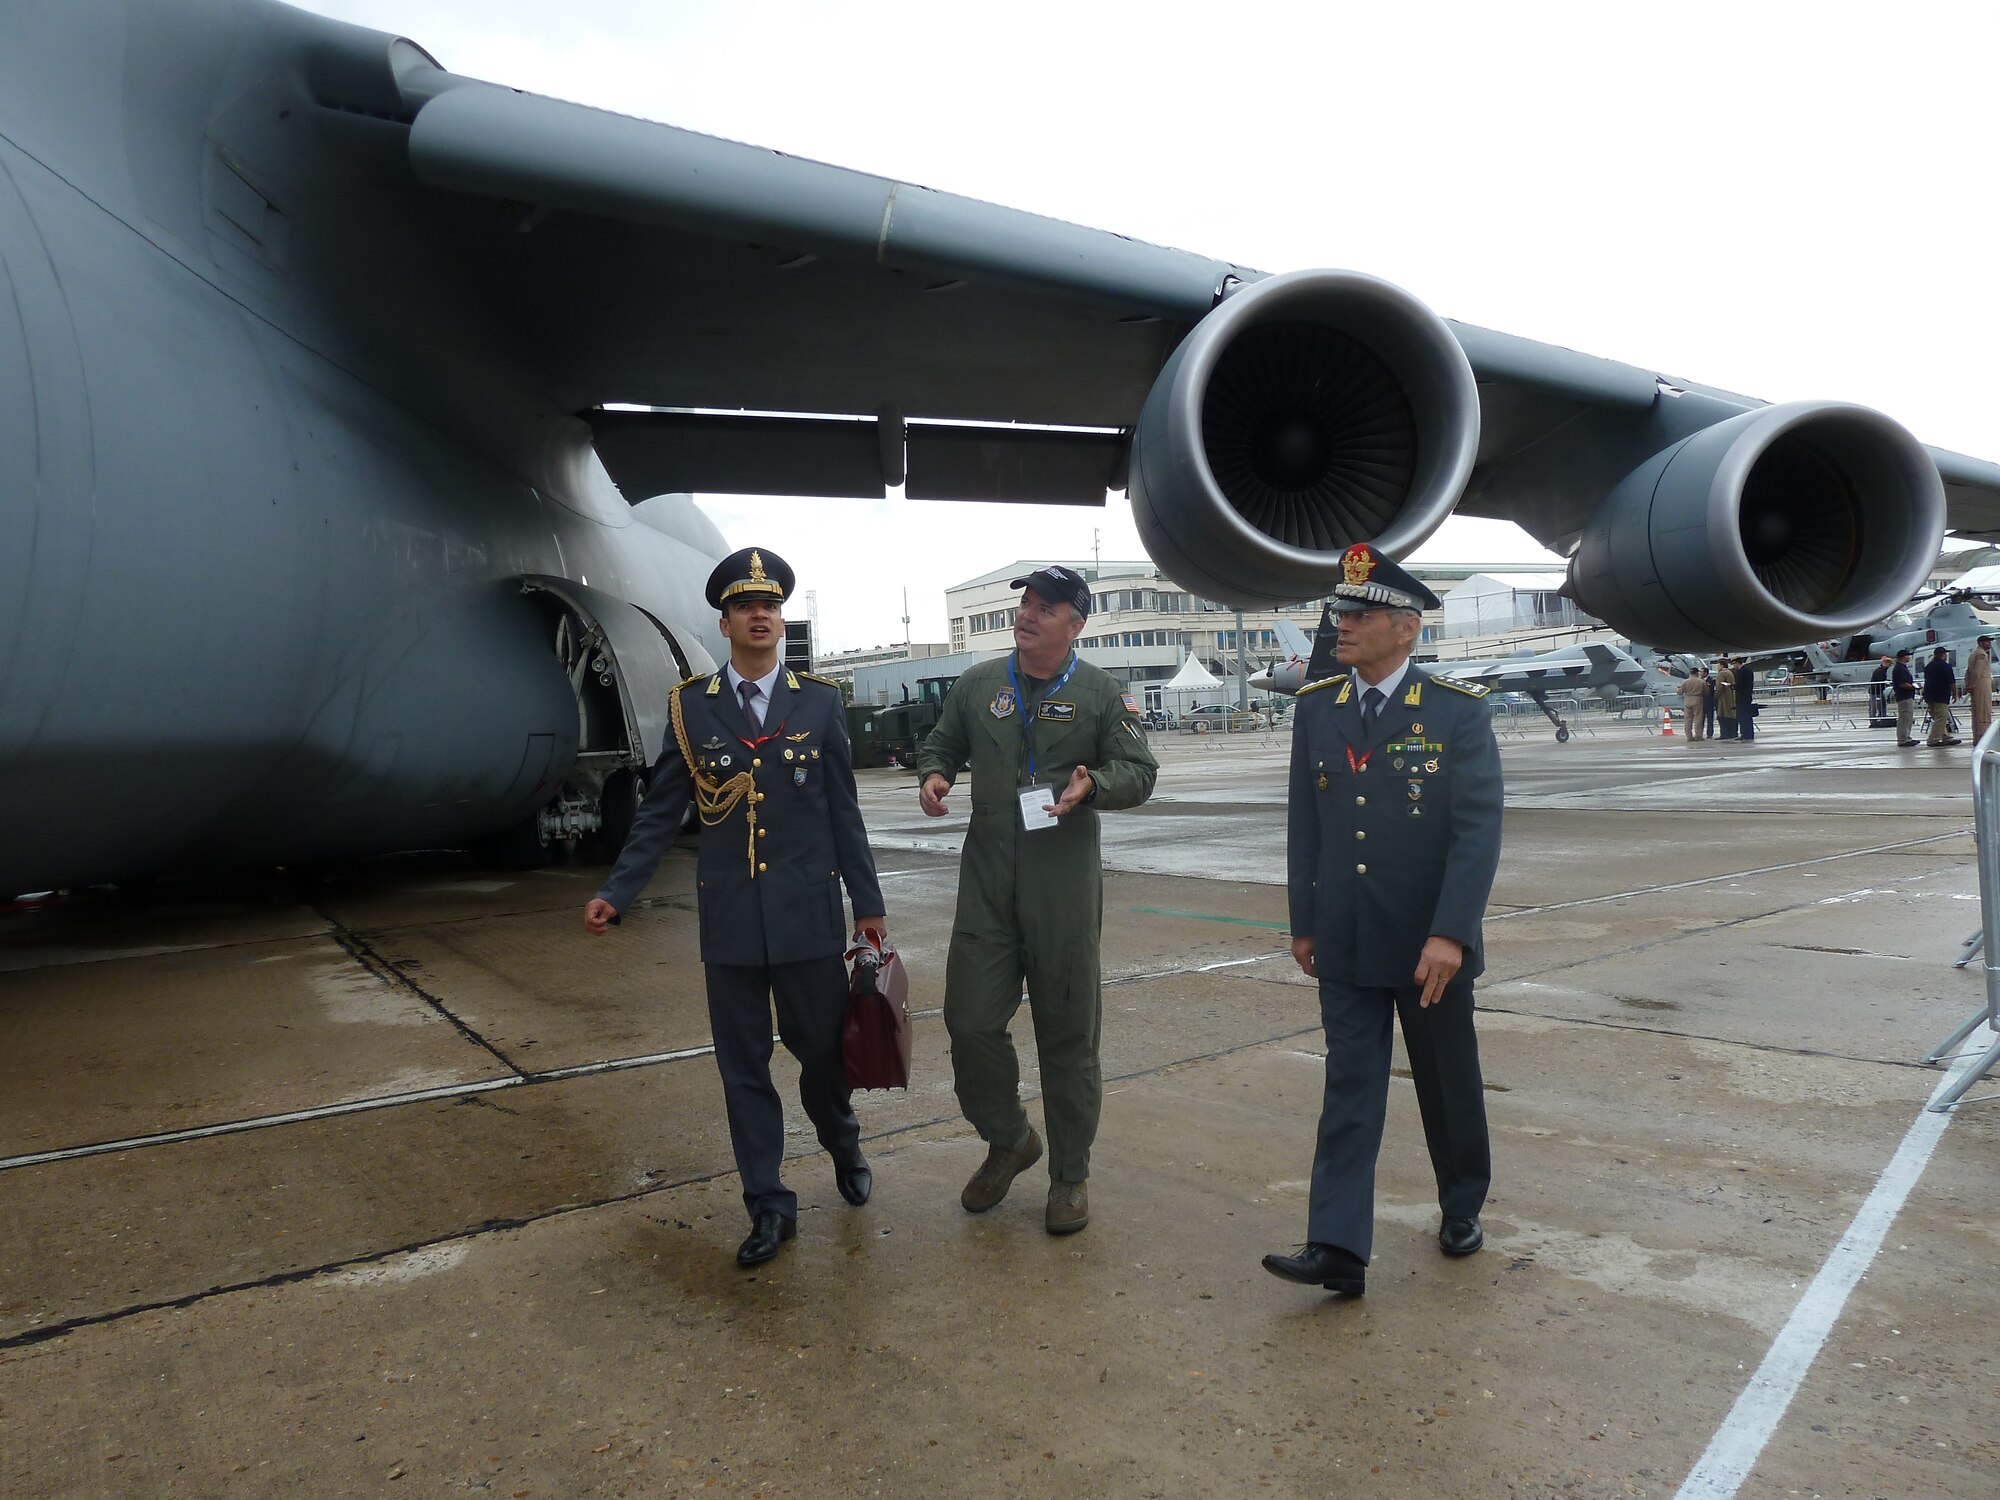 Lt. Col. Mark Alderson (center), a pilot with 709th Airlift Squadron at Dover Air Force Base, Del., tells an Italian army lieutenant general (right) about the capabilities of C-5M Super Galaxy. The C-5M is one of the 11 U.S. aircraft on display at the 49th International Paris Air Show, Le Bourget Airport, France, June 20-26. (U.S. Air Force photo/Tech. Sgt. Francesca Popp)